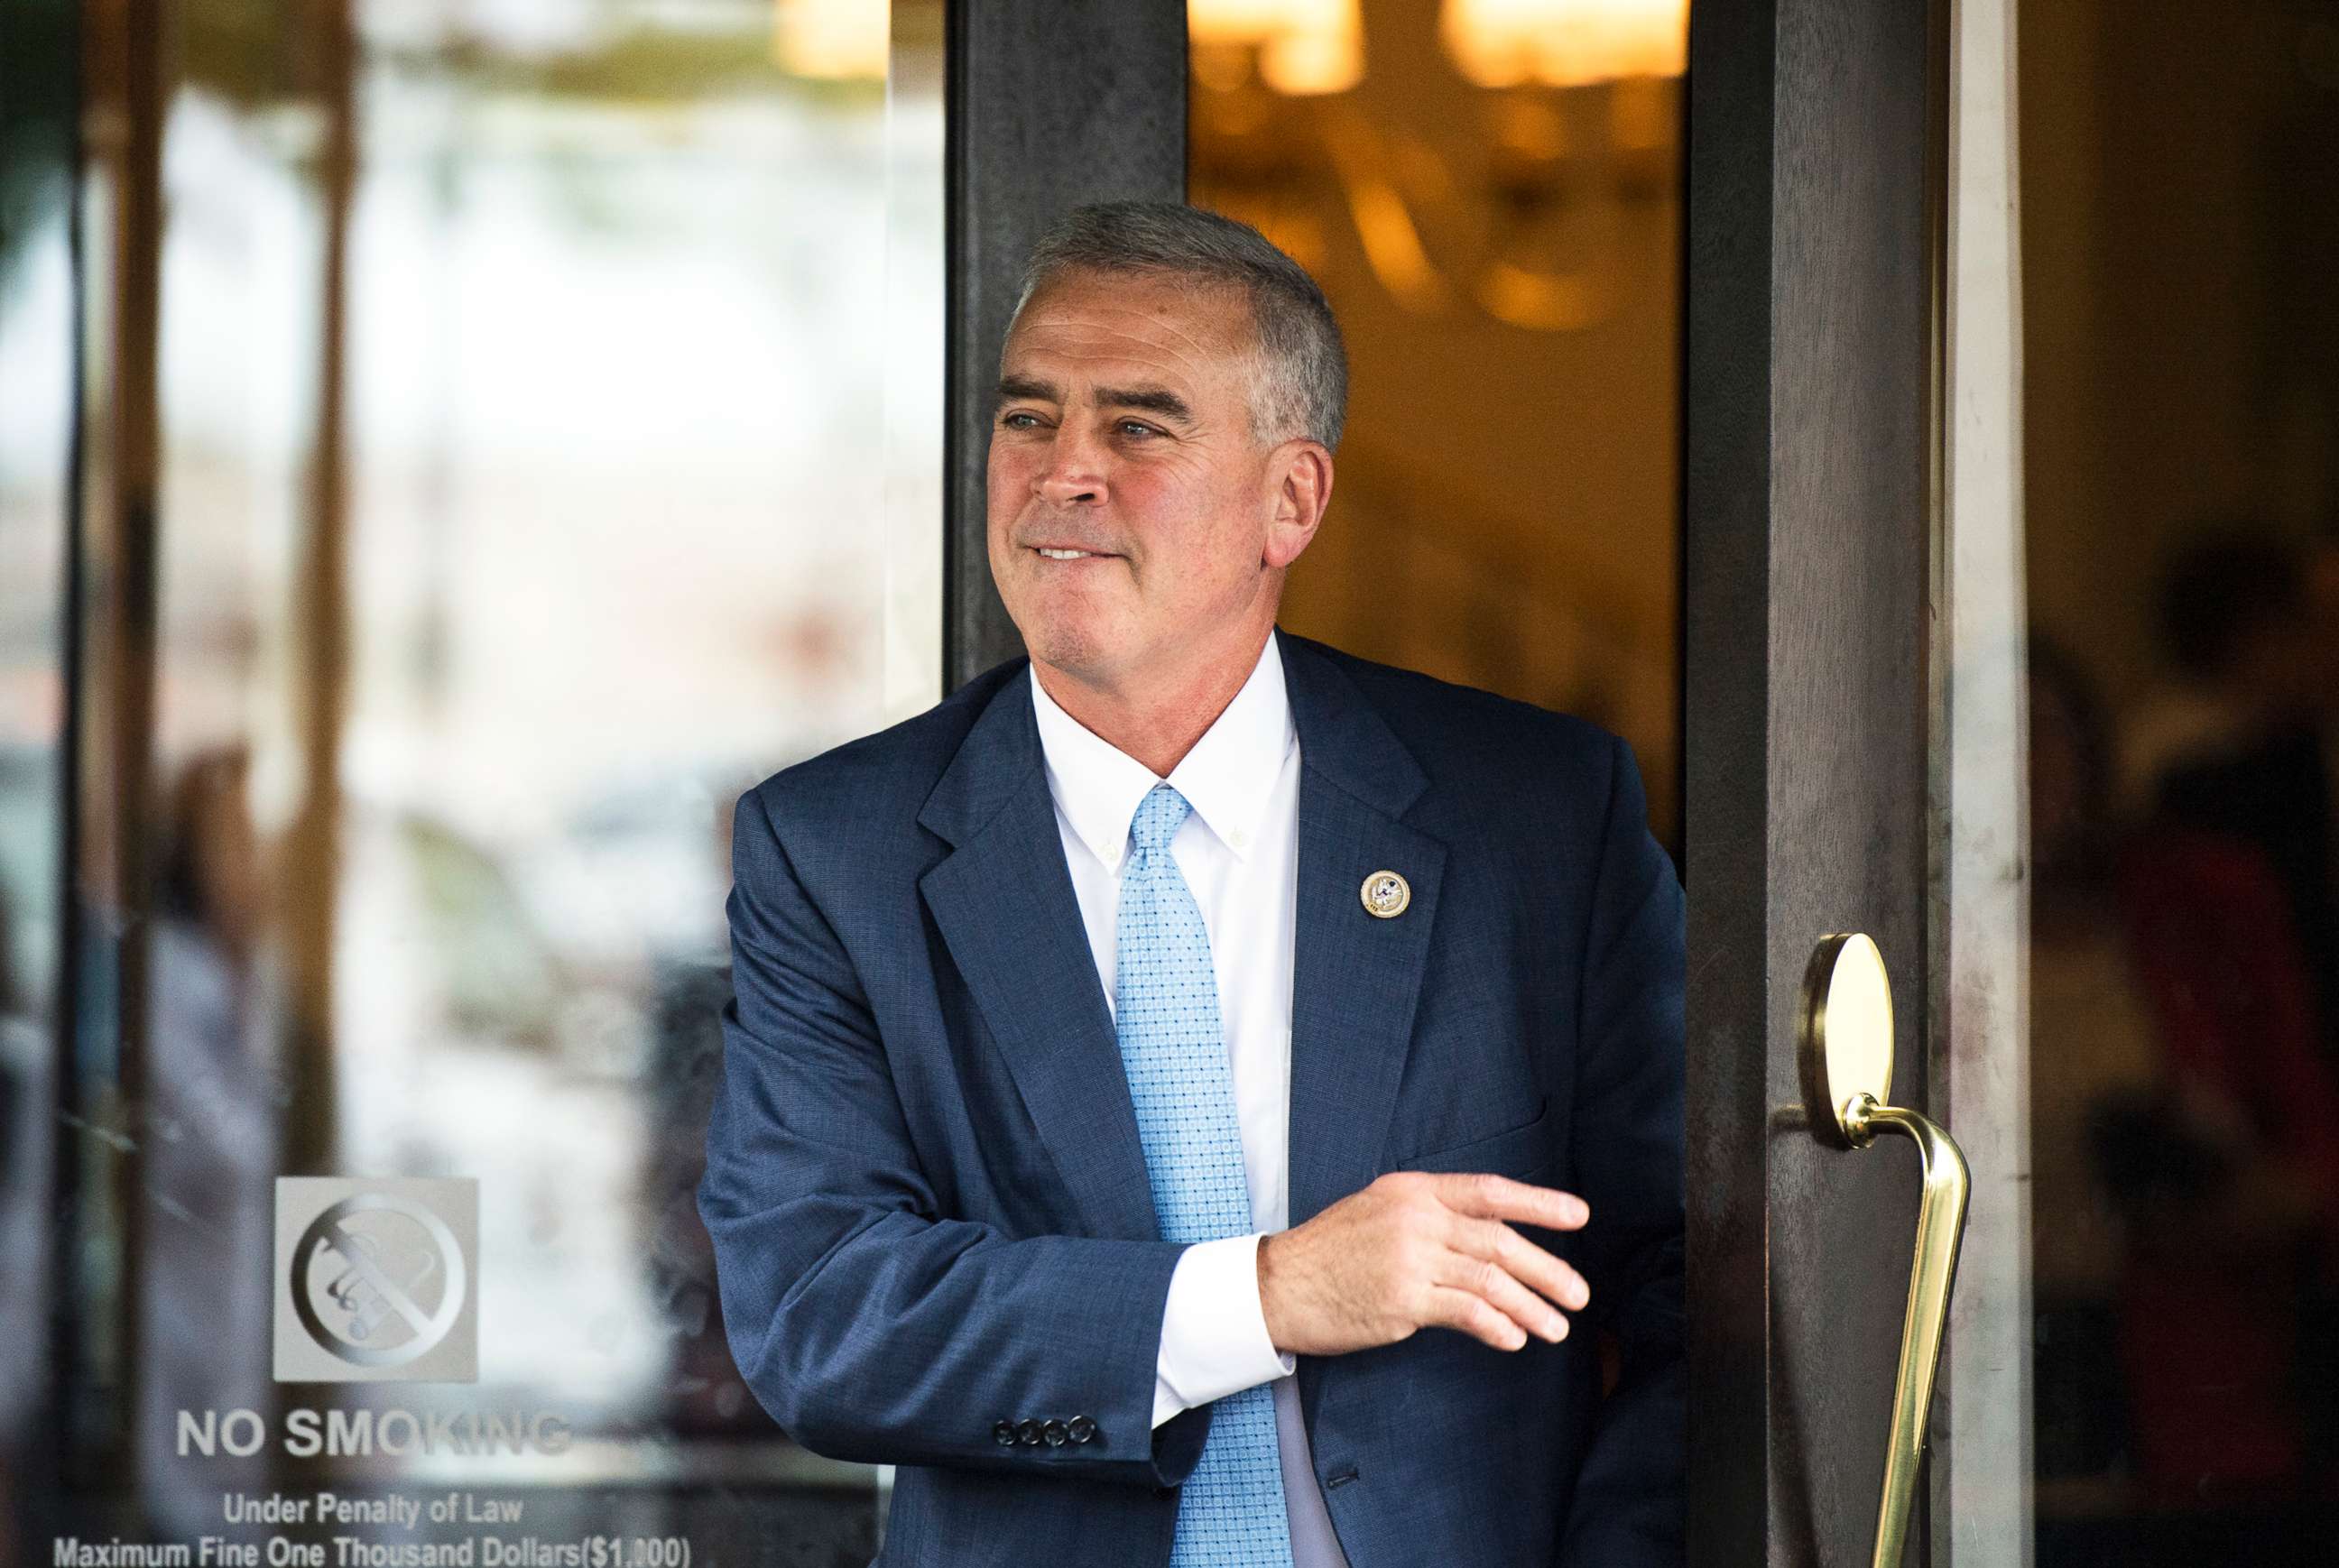 PHOTO: Rep. Brad Wenstrup leaves the House Republican Conference meeting at the Capitol Hill Club on May 16, 2018.